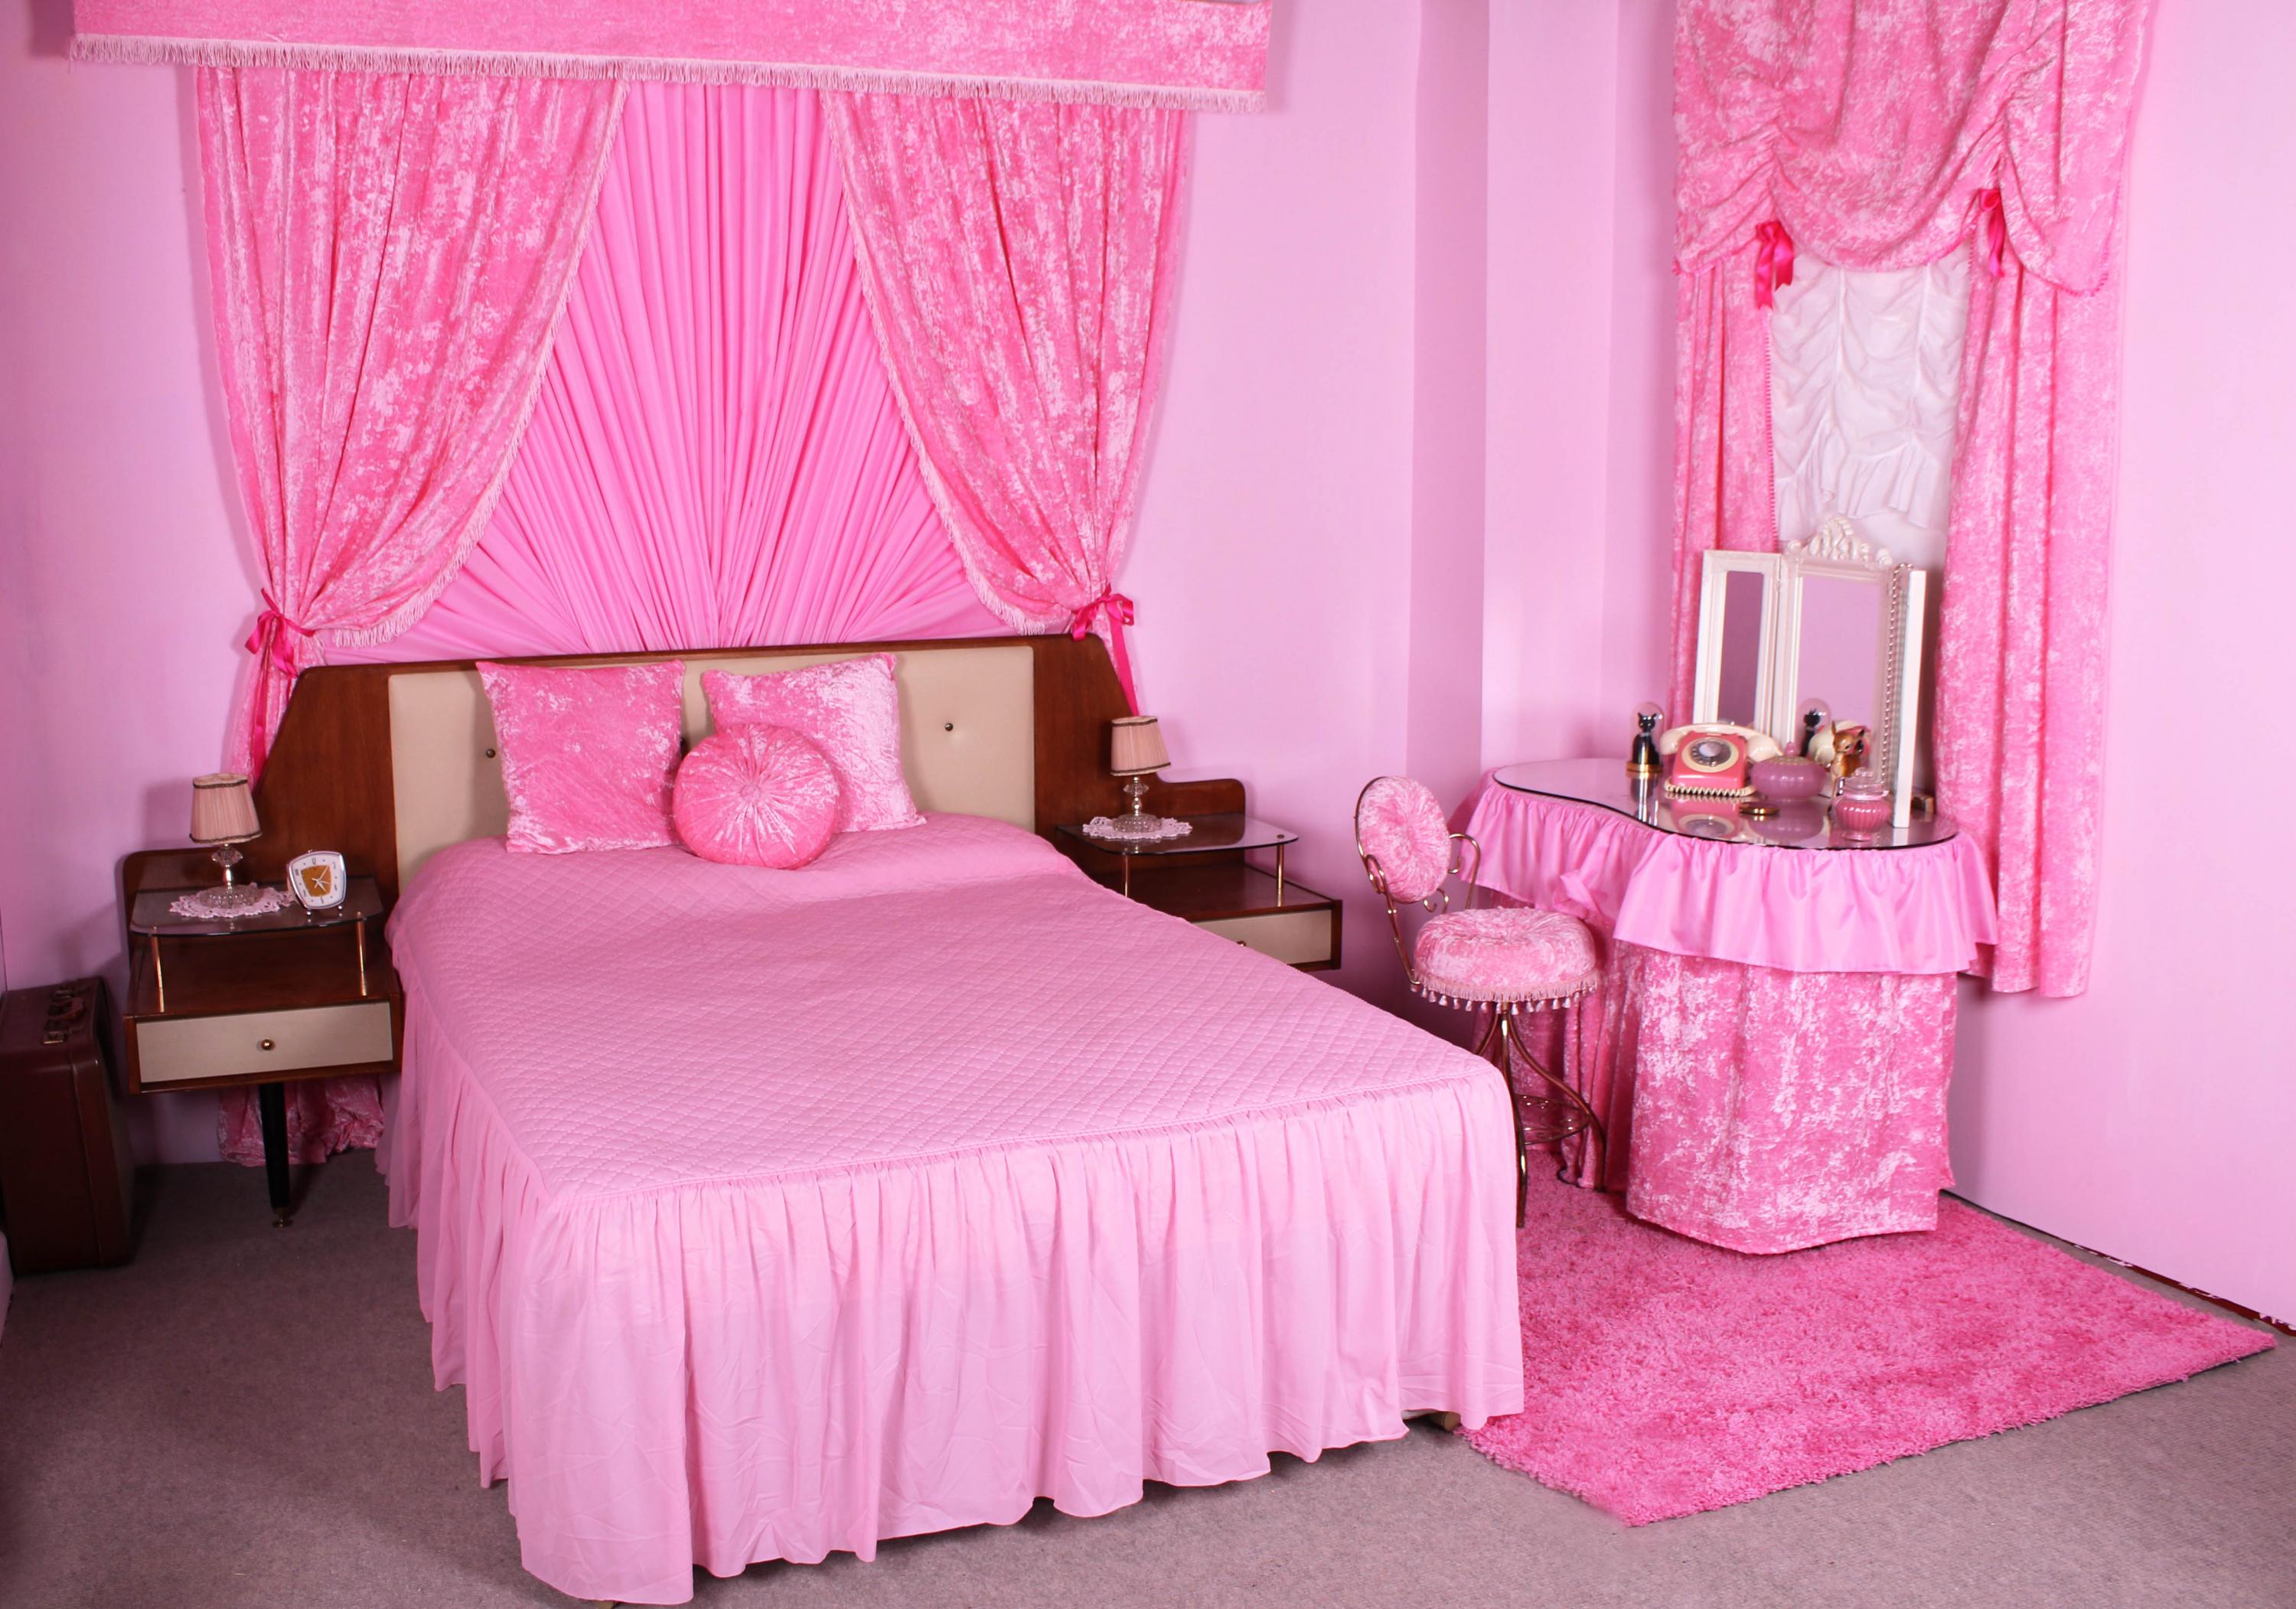 Decorating Ideas For Pink Bedroom